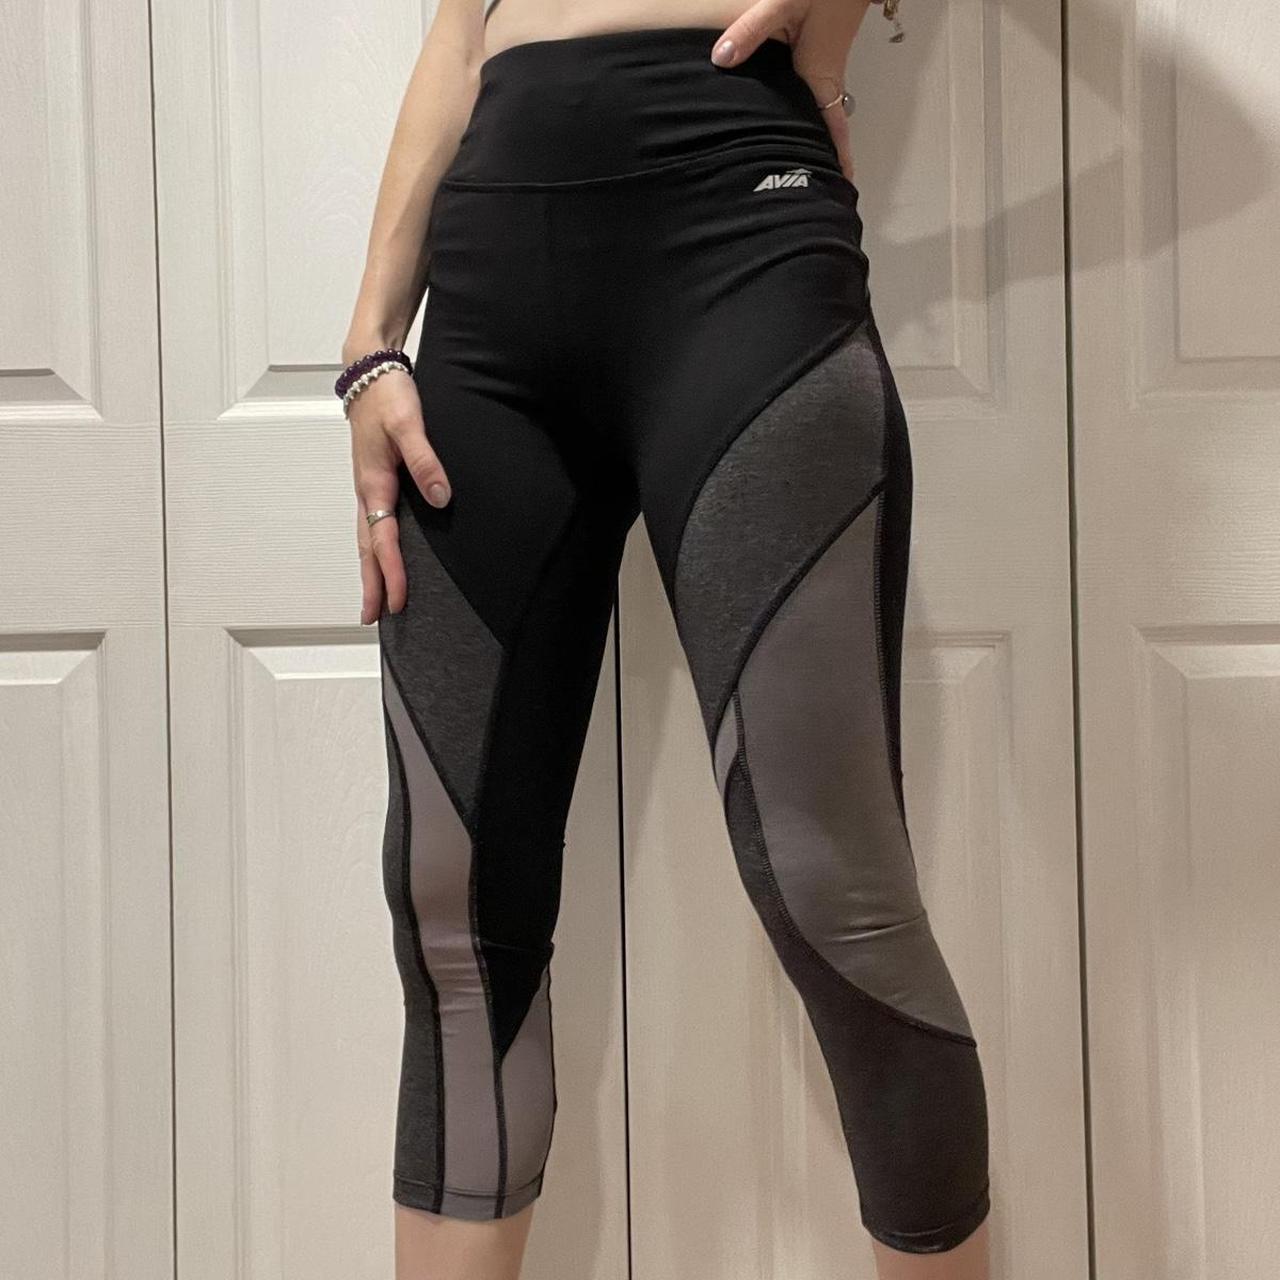 These high-waisted cropped Avia leggings feature a - Depop